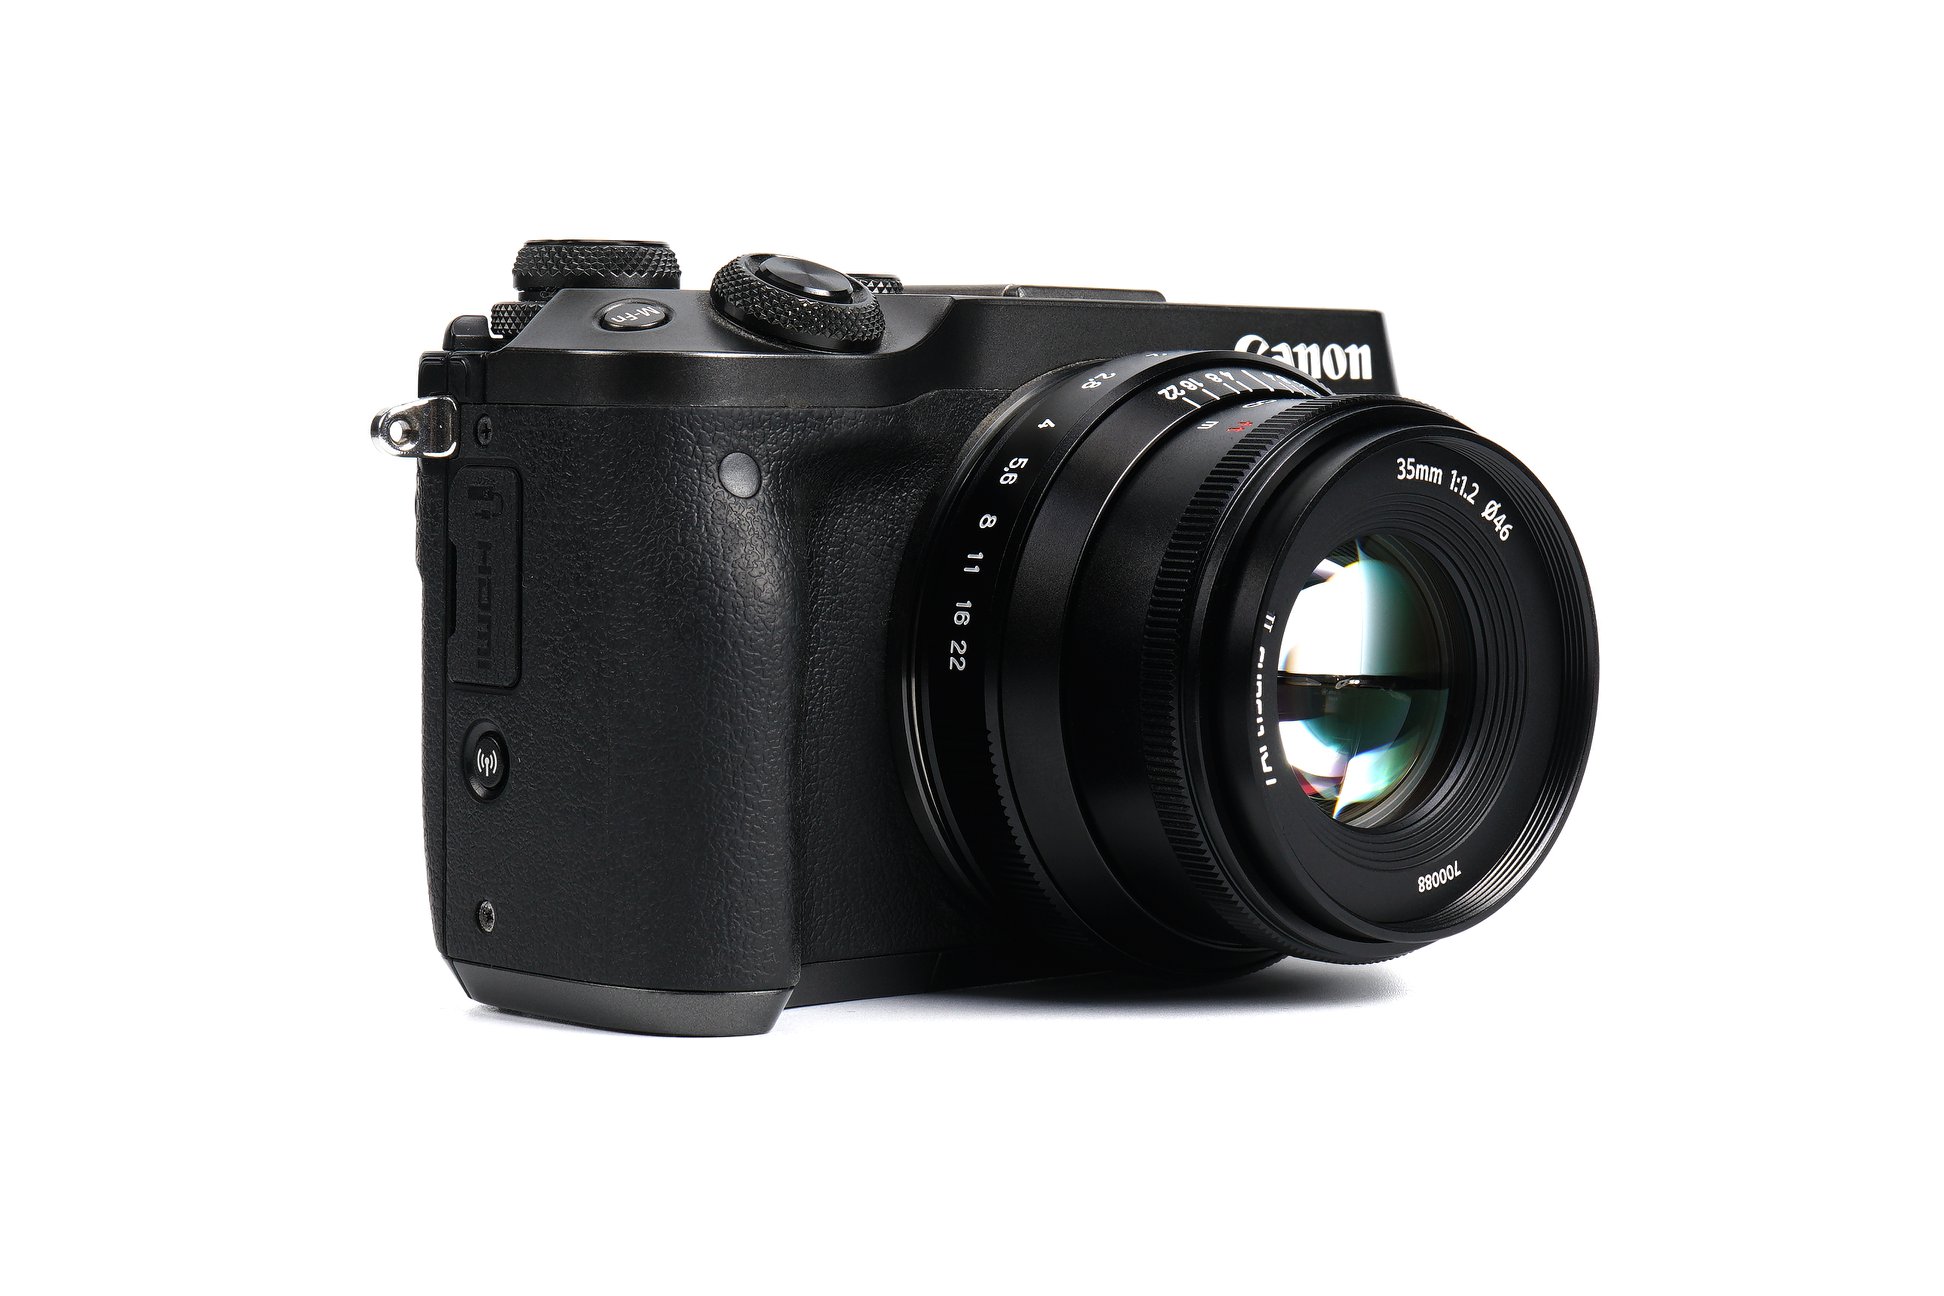 7Artisans to release a new 35mm f/1.2 Mark II mirrorless APS-C